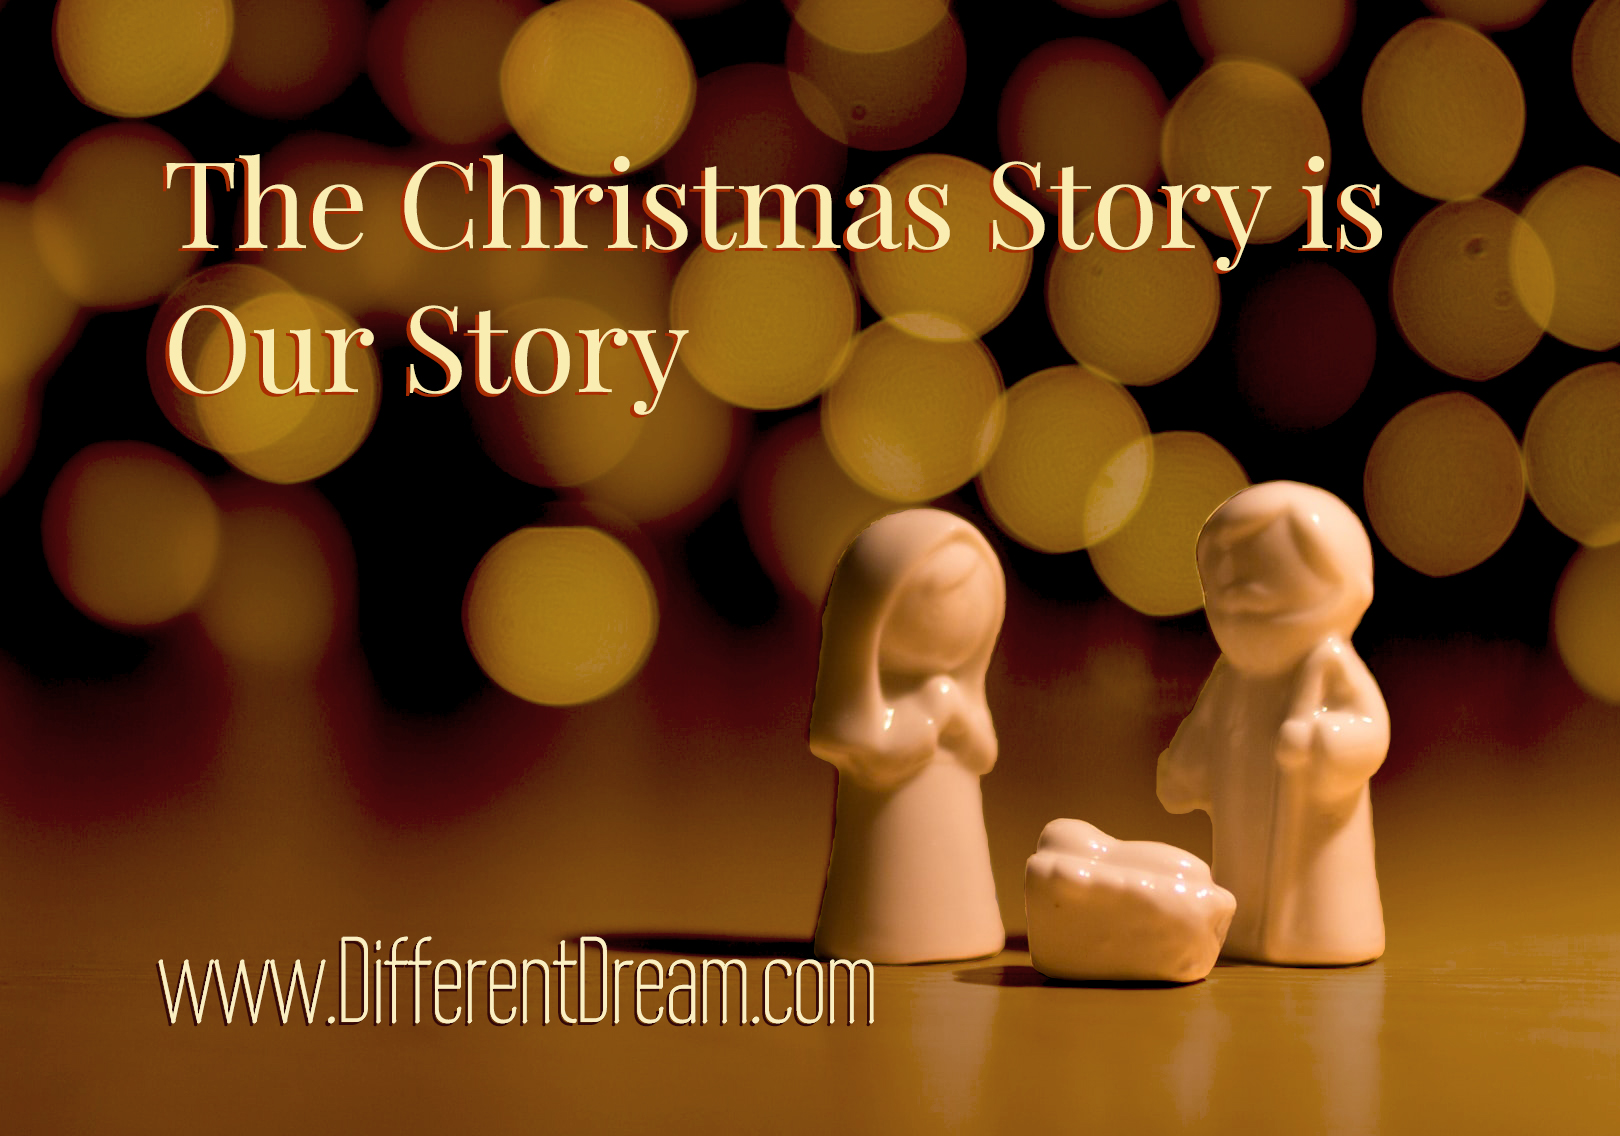 Guest blogger Mark Arnold explains how the Christmas story is a special needs story as he presents each aspect of the birth of Jesus.